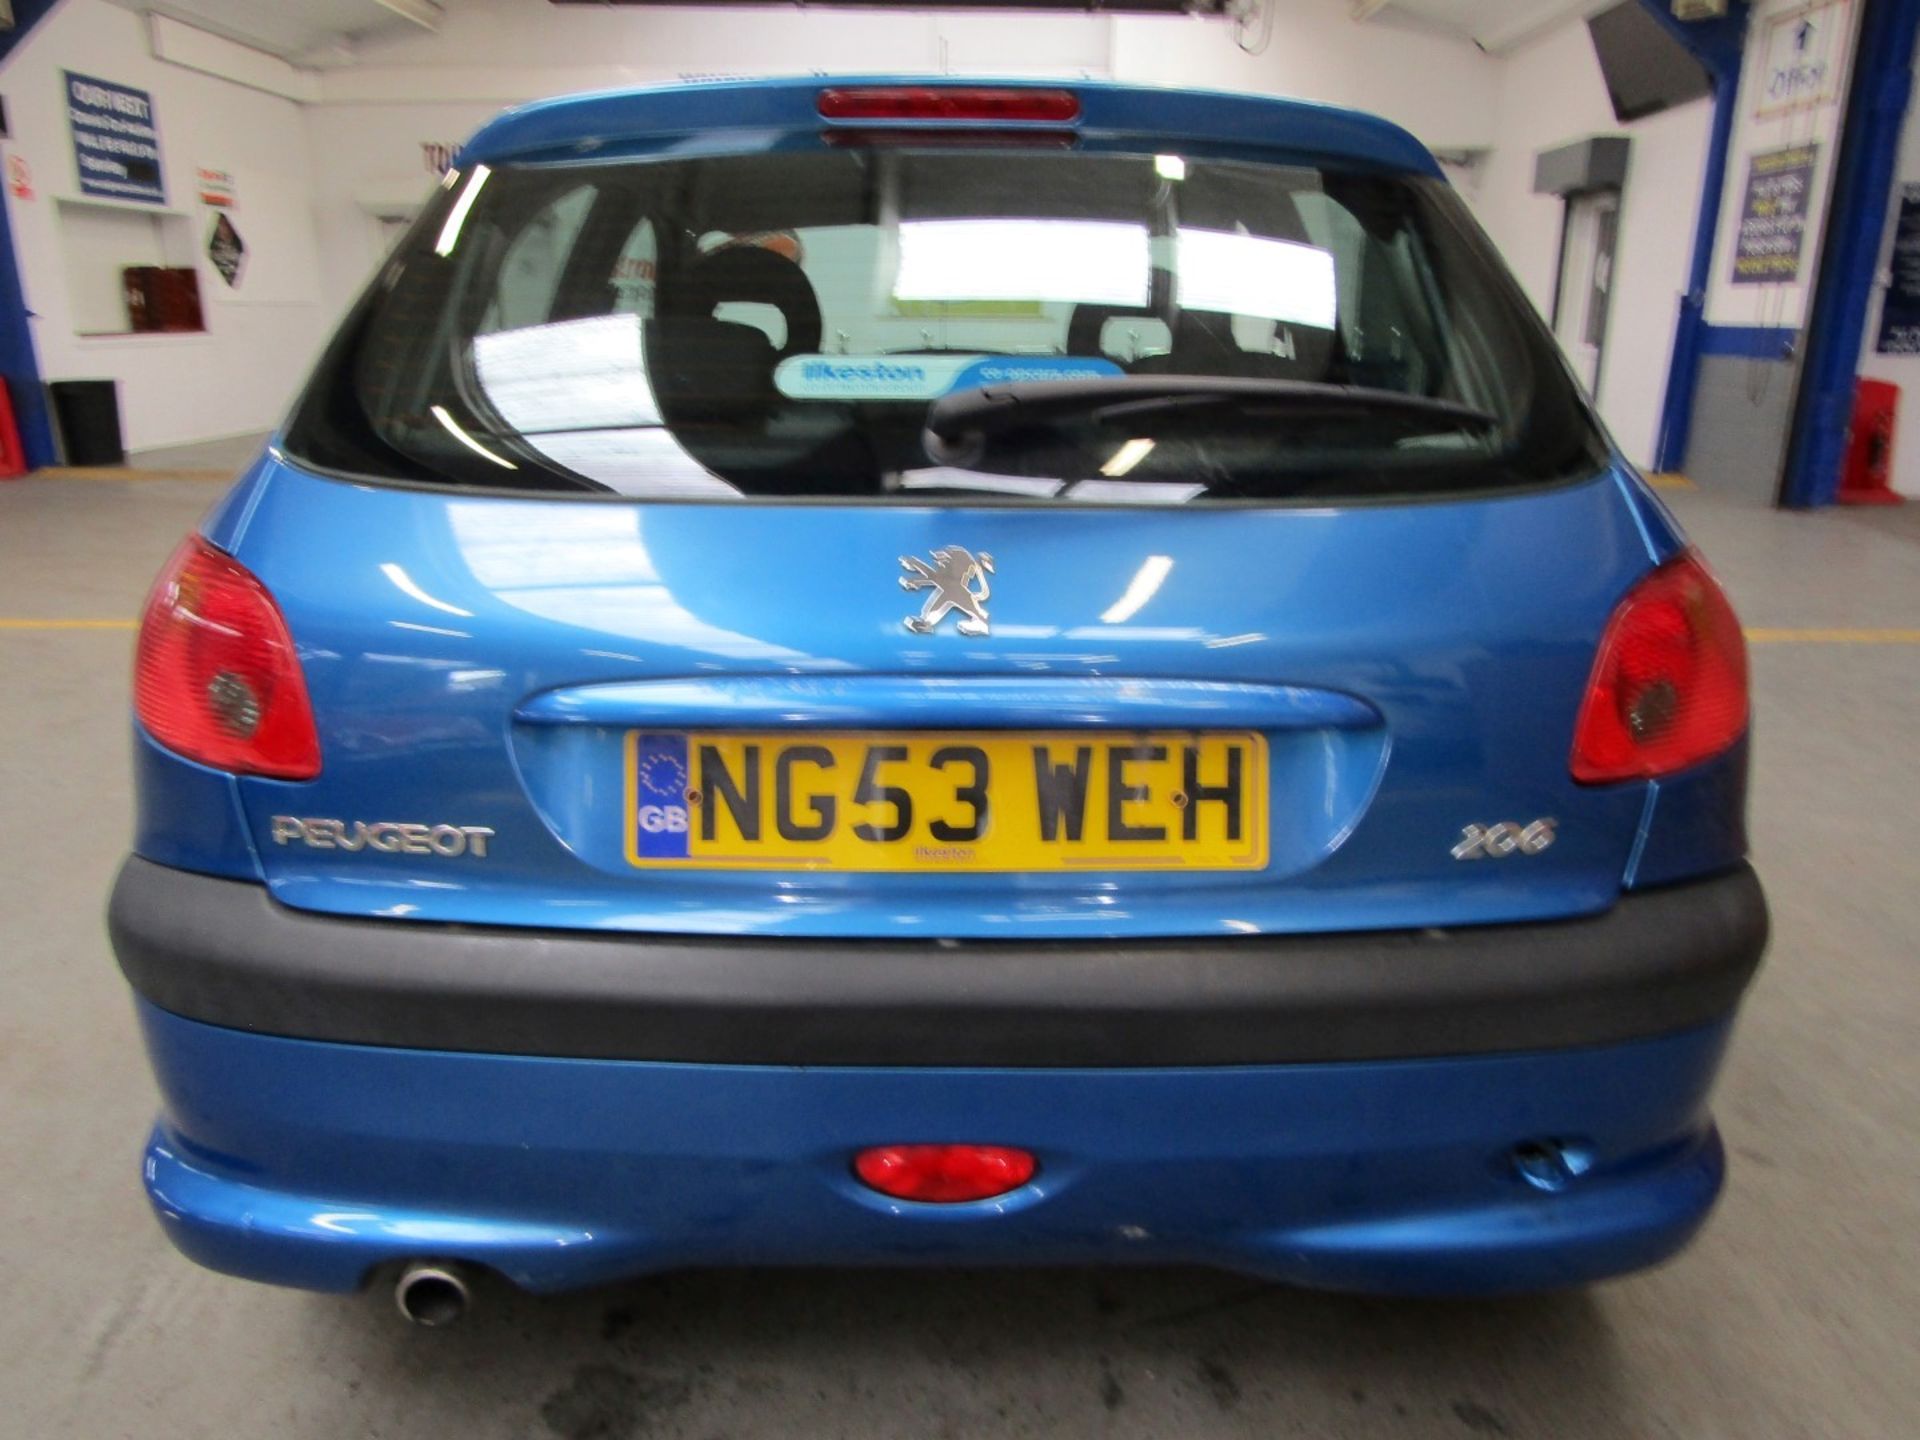 53 03 Peugeot 206 Entice - Image 19 of 21